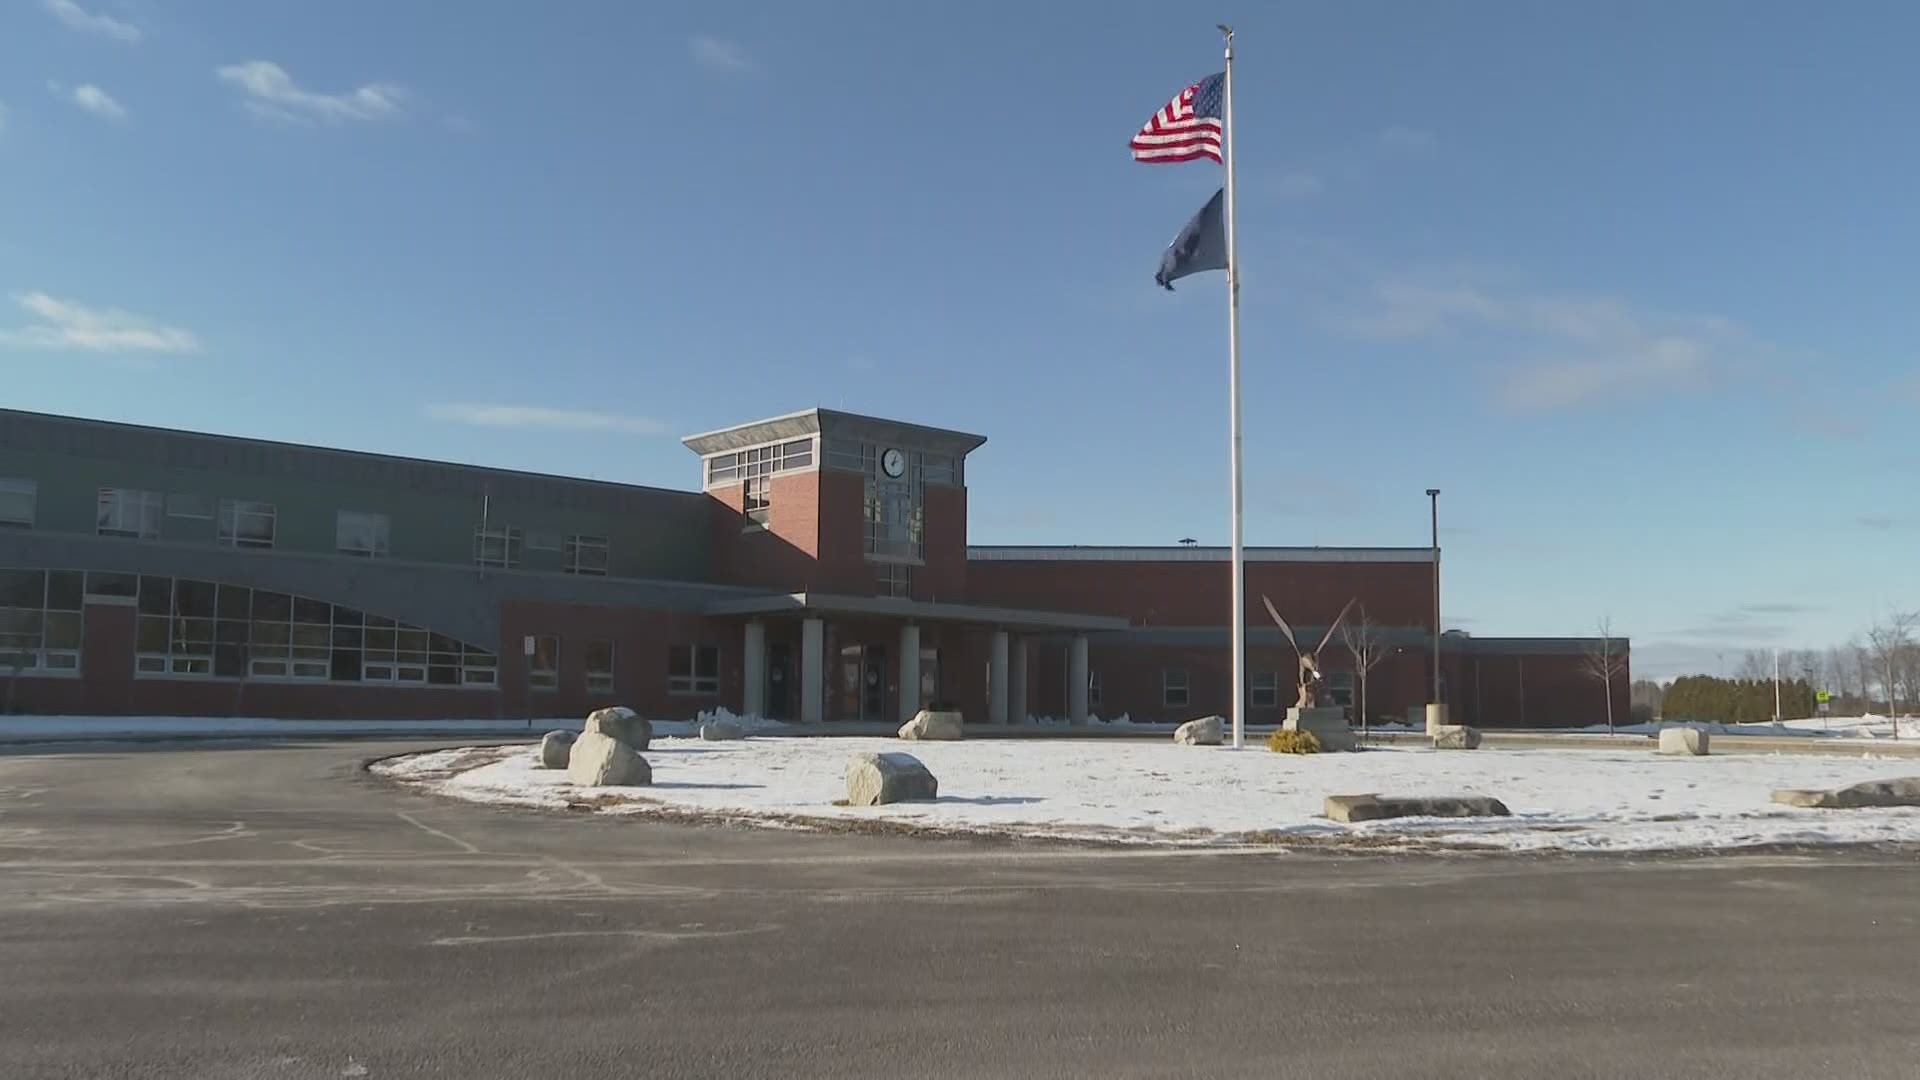 A COVID-19 outbreak emerges in another Maine school district.